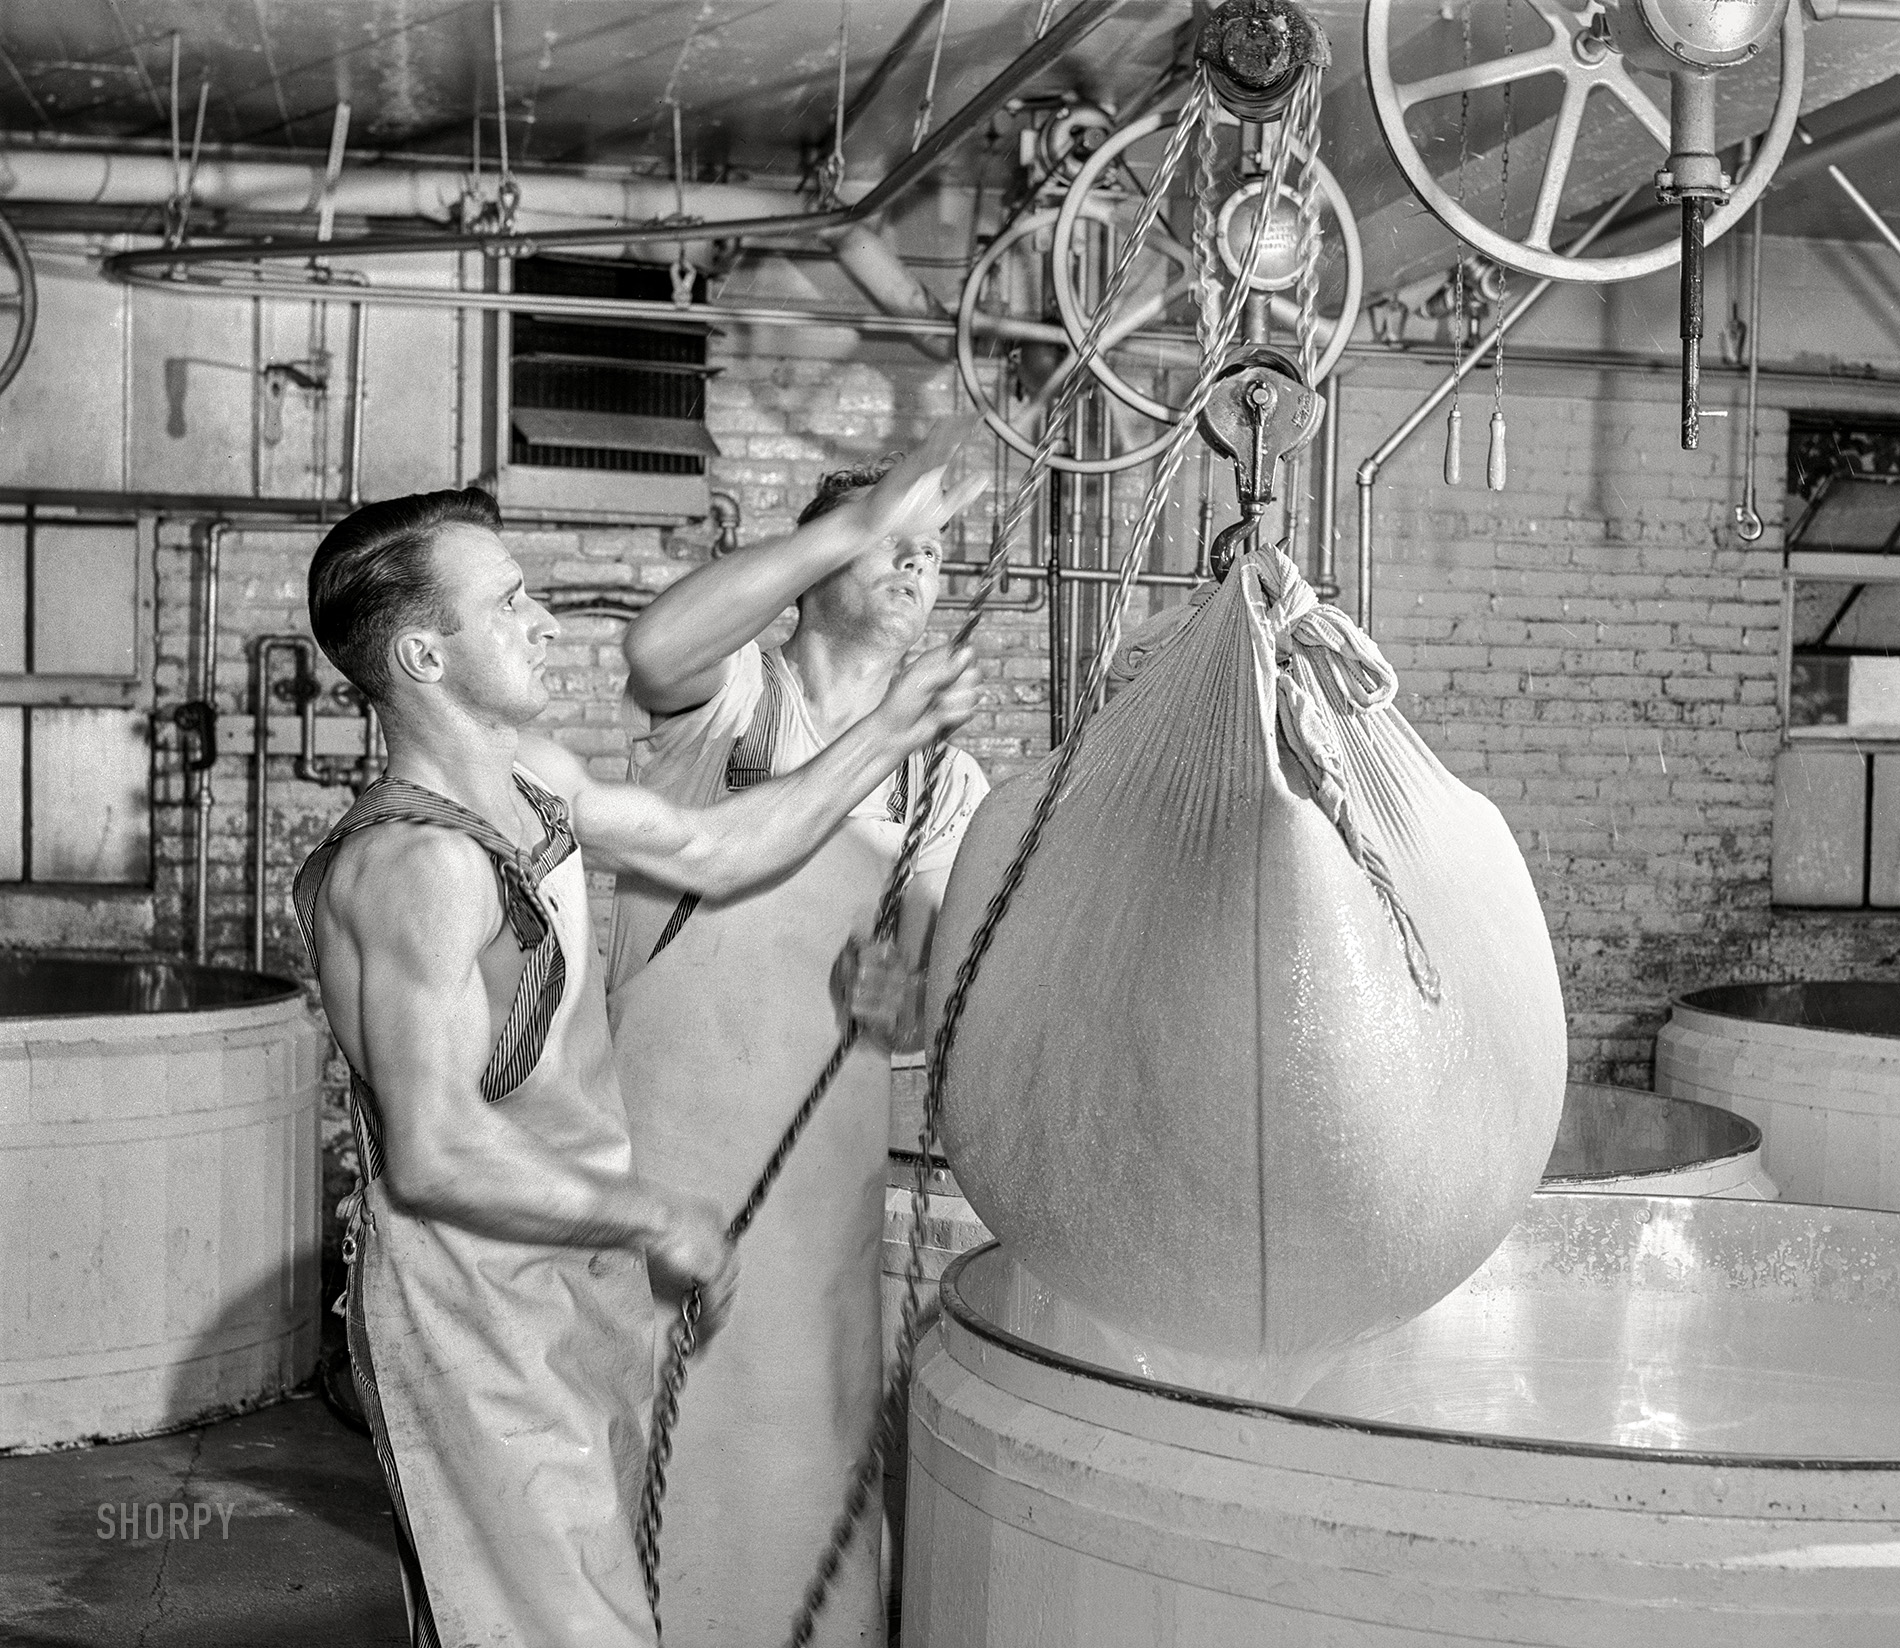 July 1941. "Removing the curd from the whey. Swiss cheese factory in Madison, Wisconsin." Acetate negative by John Vachon for the Farm Security Administration. View full size.